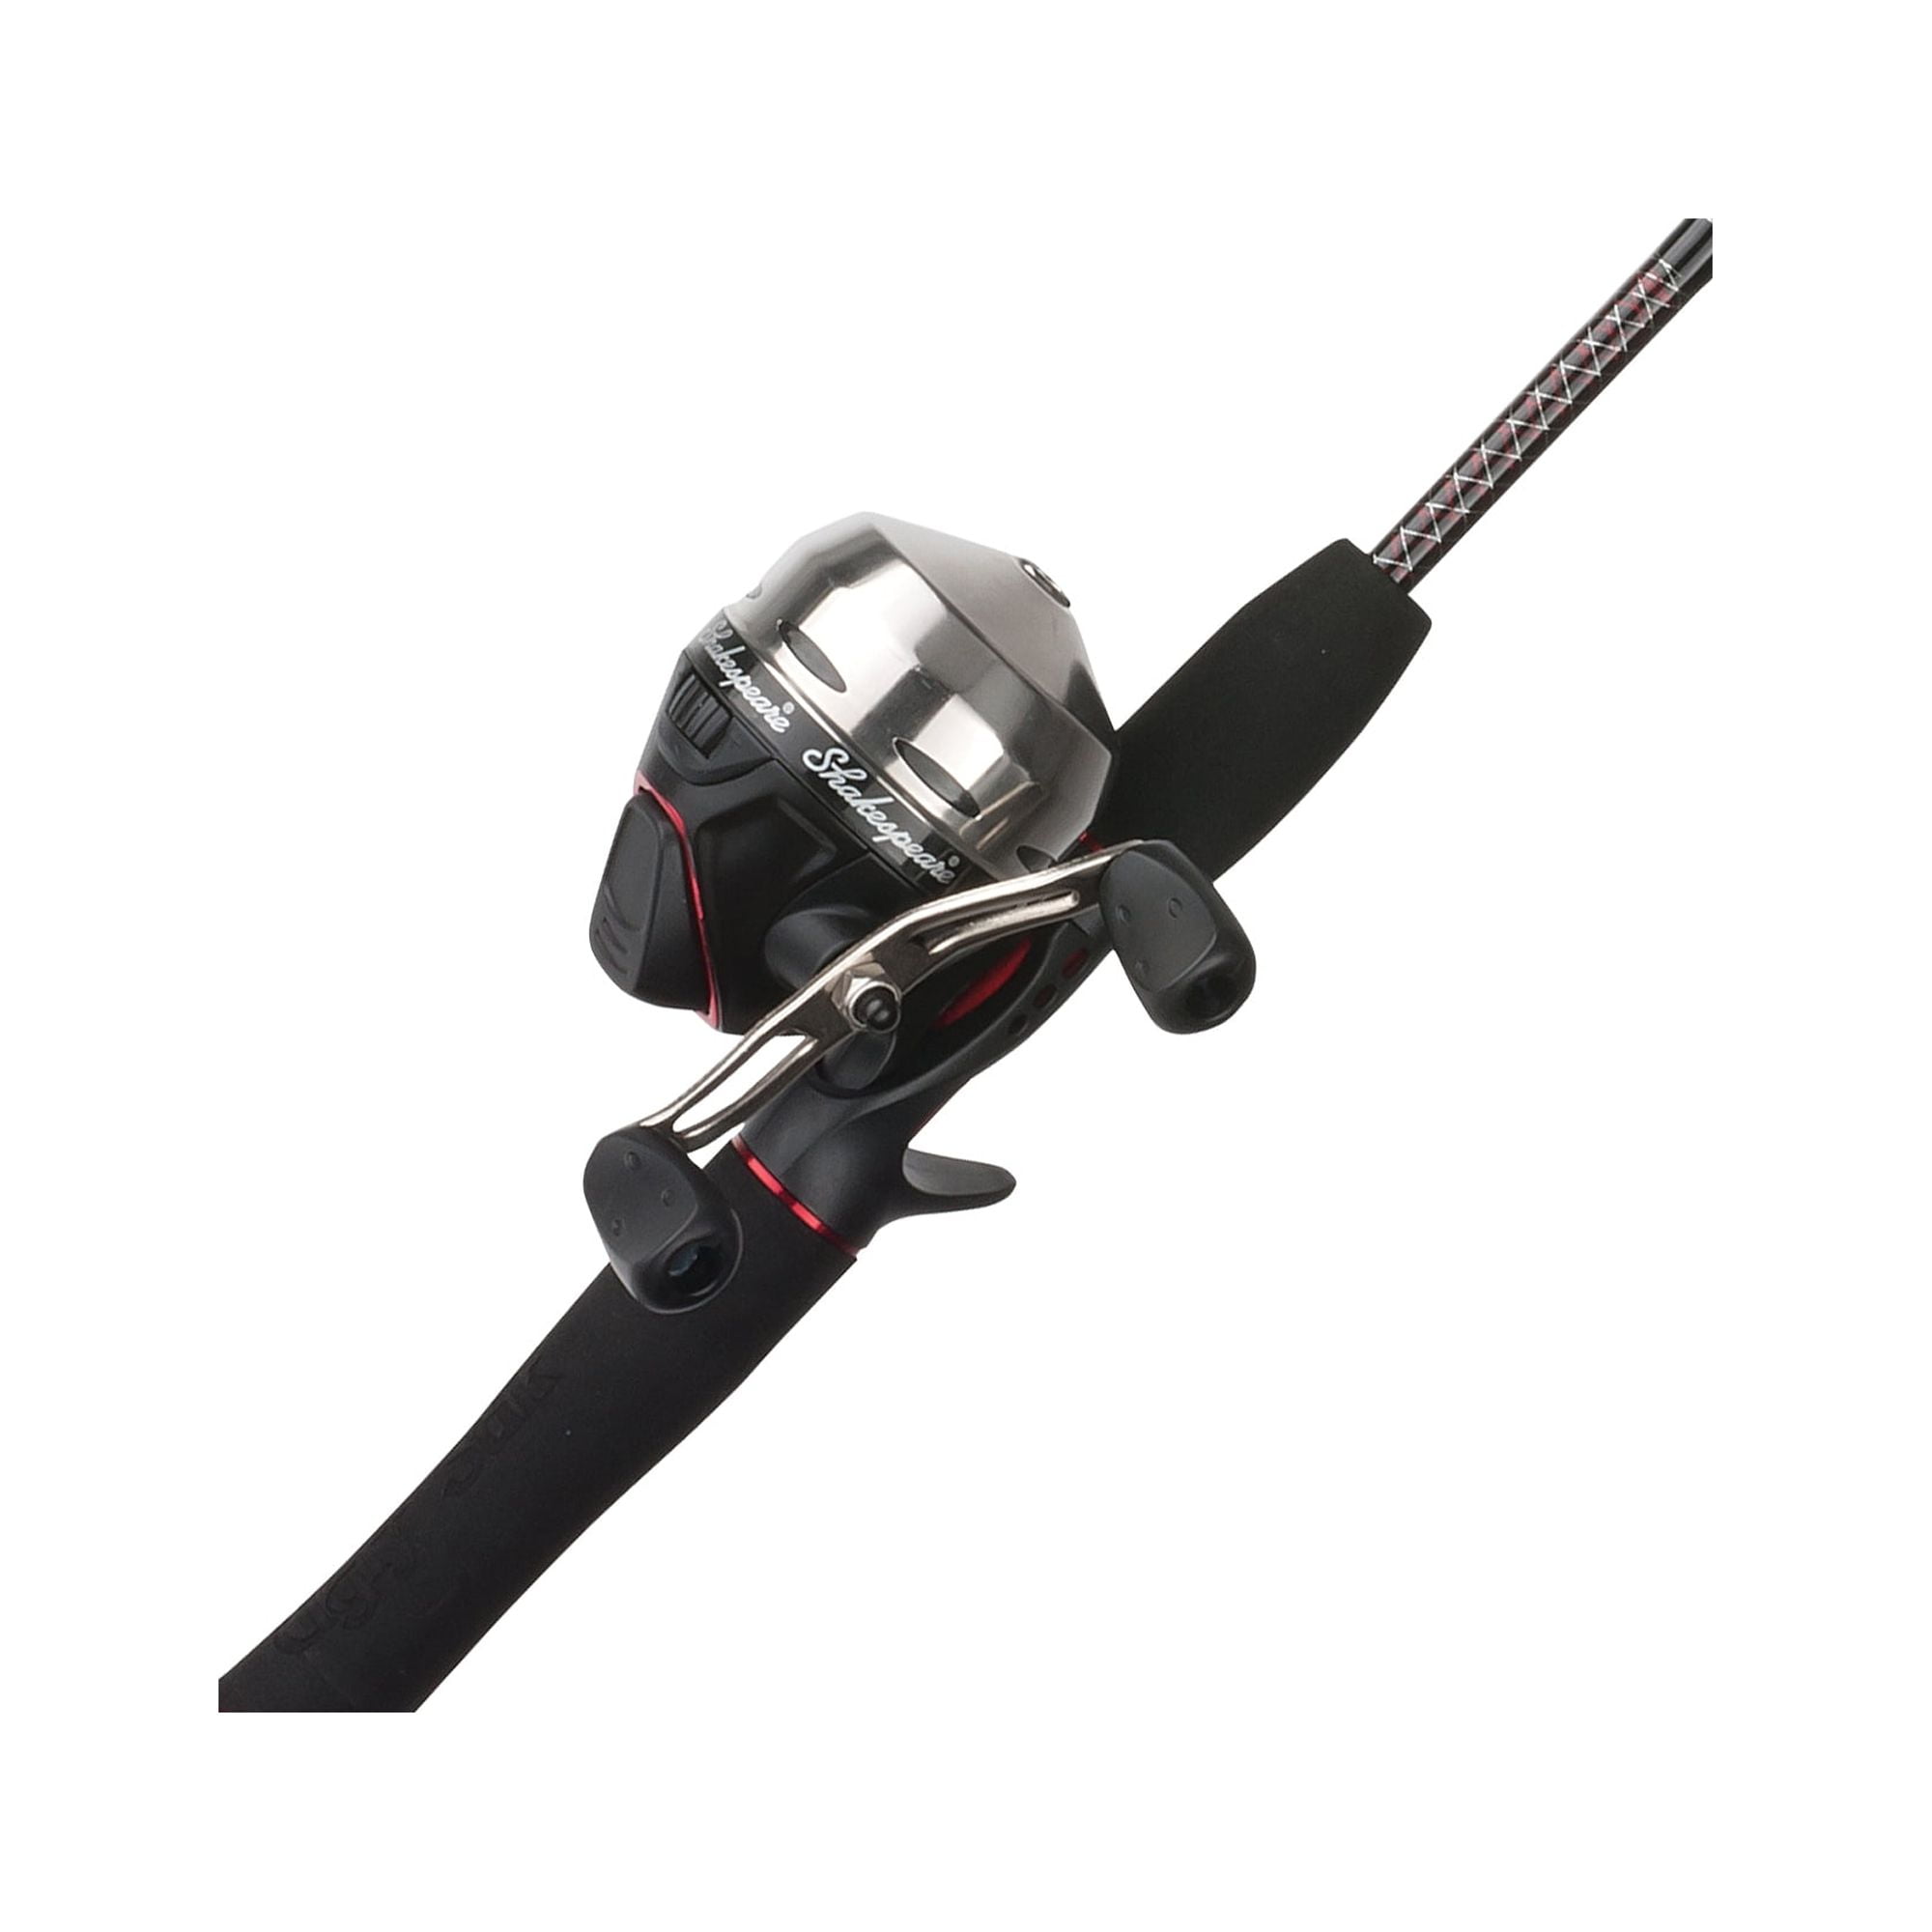 Ugly Stik 5' GX2 Spincast Fishing Rod and Reel Spinning Combo